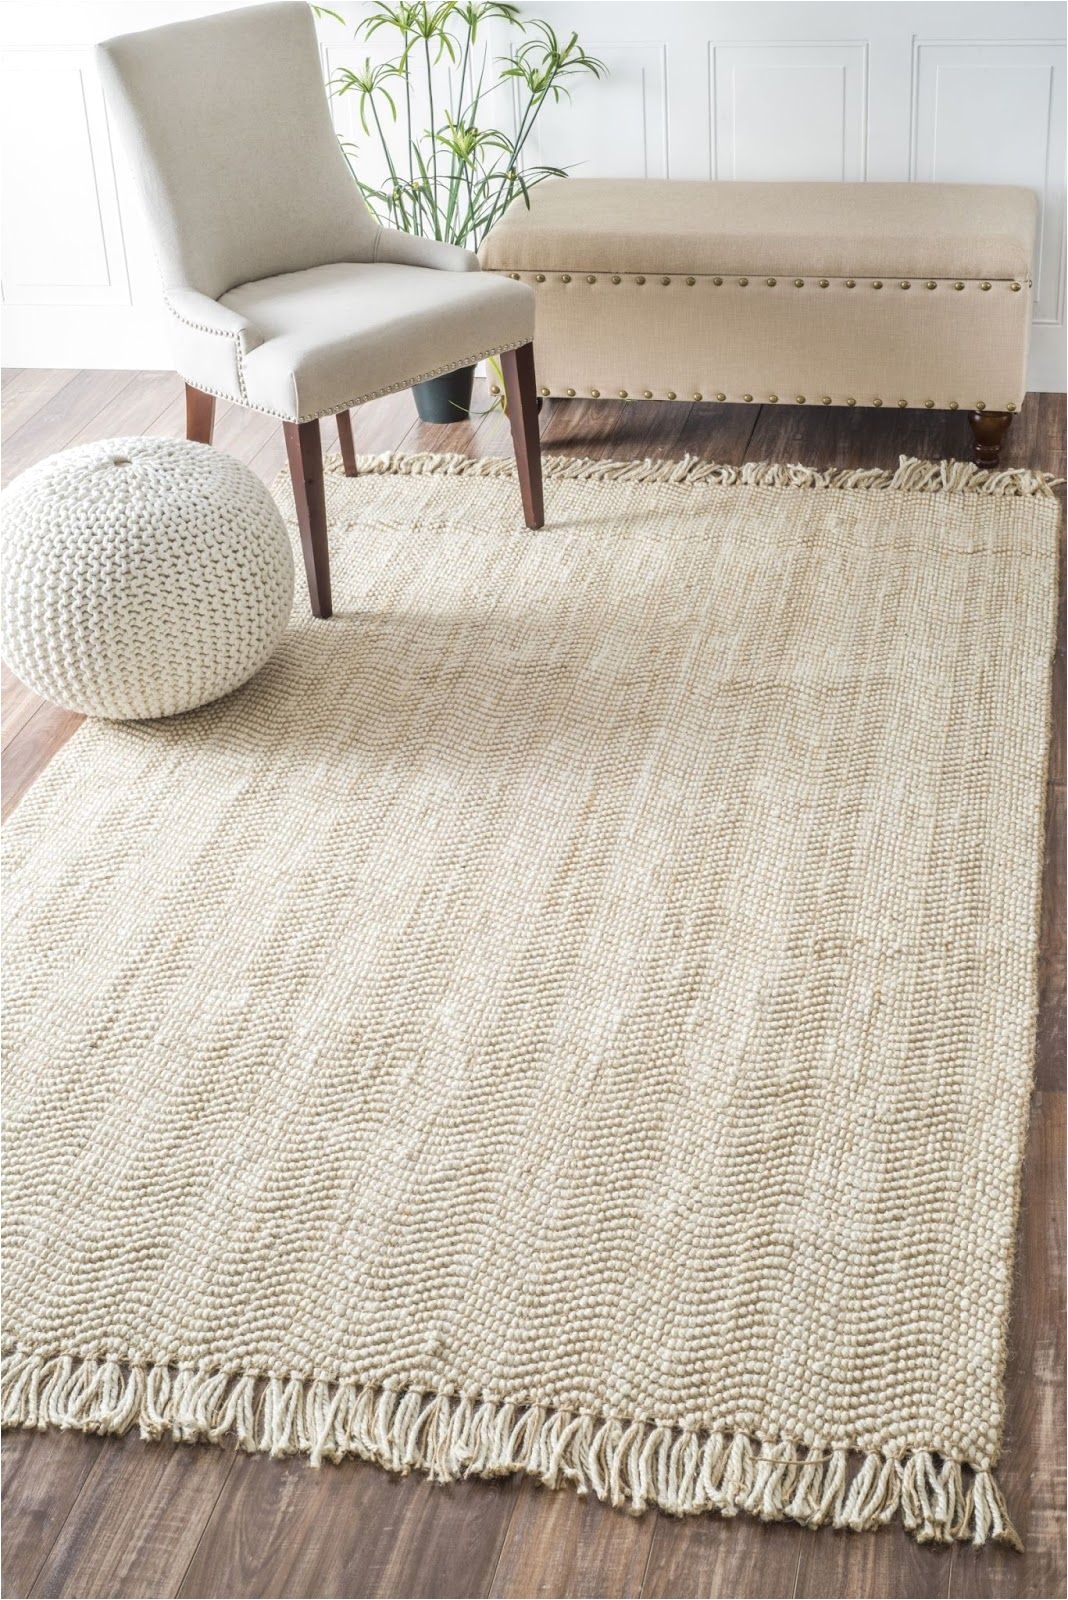 picking the perfect rug five neutral and affordable area rugs littlehouseoffour com